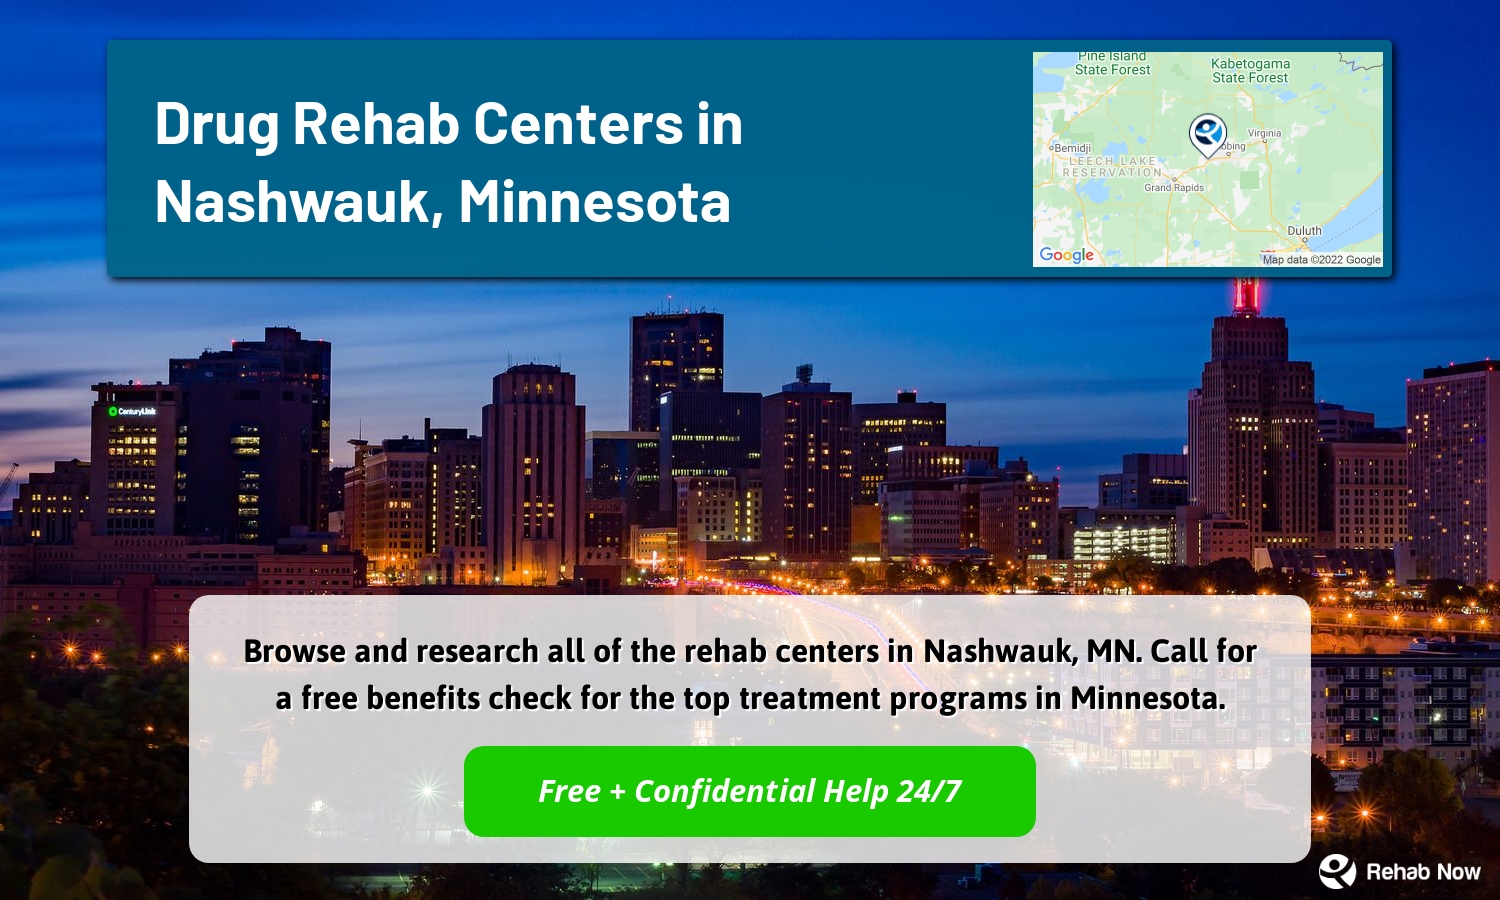 Browse and research all of the rehab centers in Nashwauk, MN. Call for a free benefits check for the top treatment programs in Minnesota.